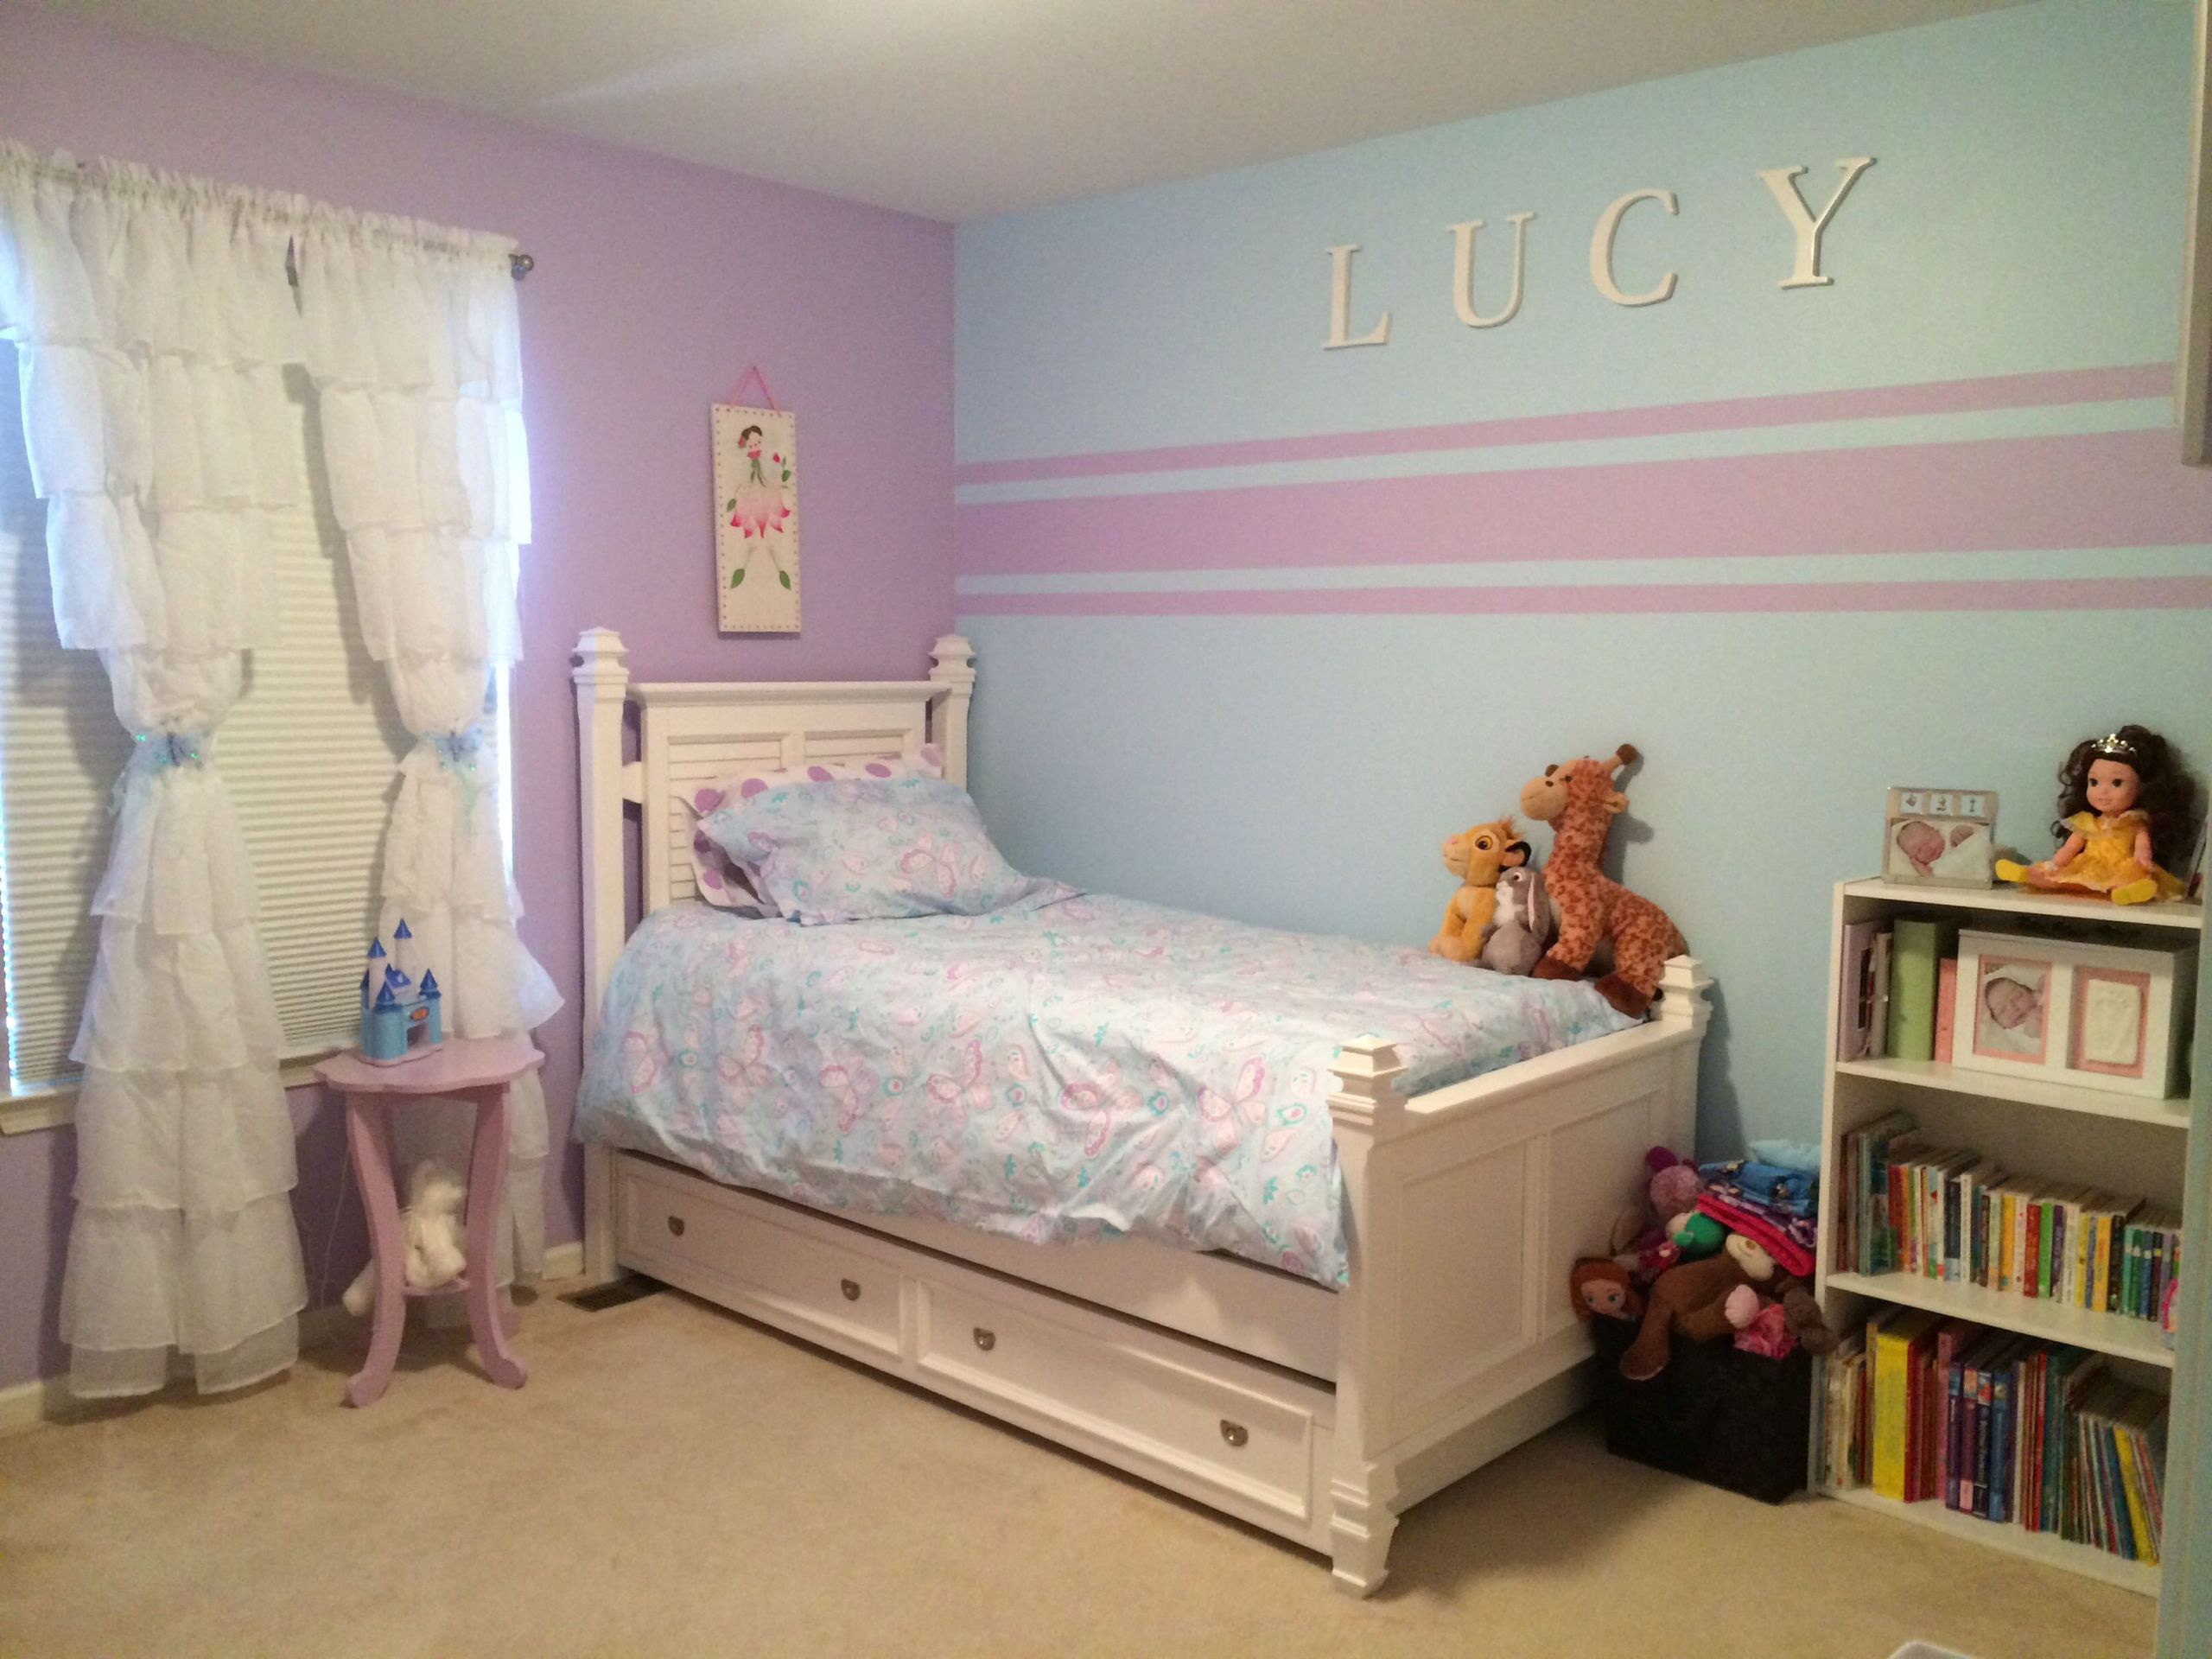 Kids Room Accent Wall
 Accent wall stripes for little girl room Kristin duvet